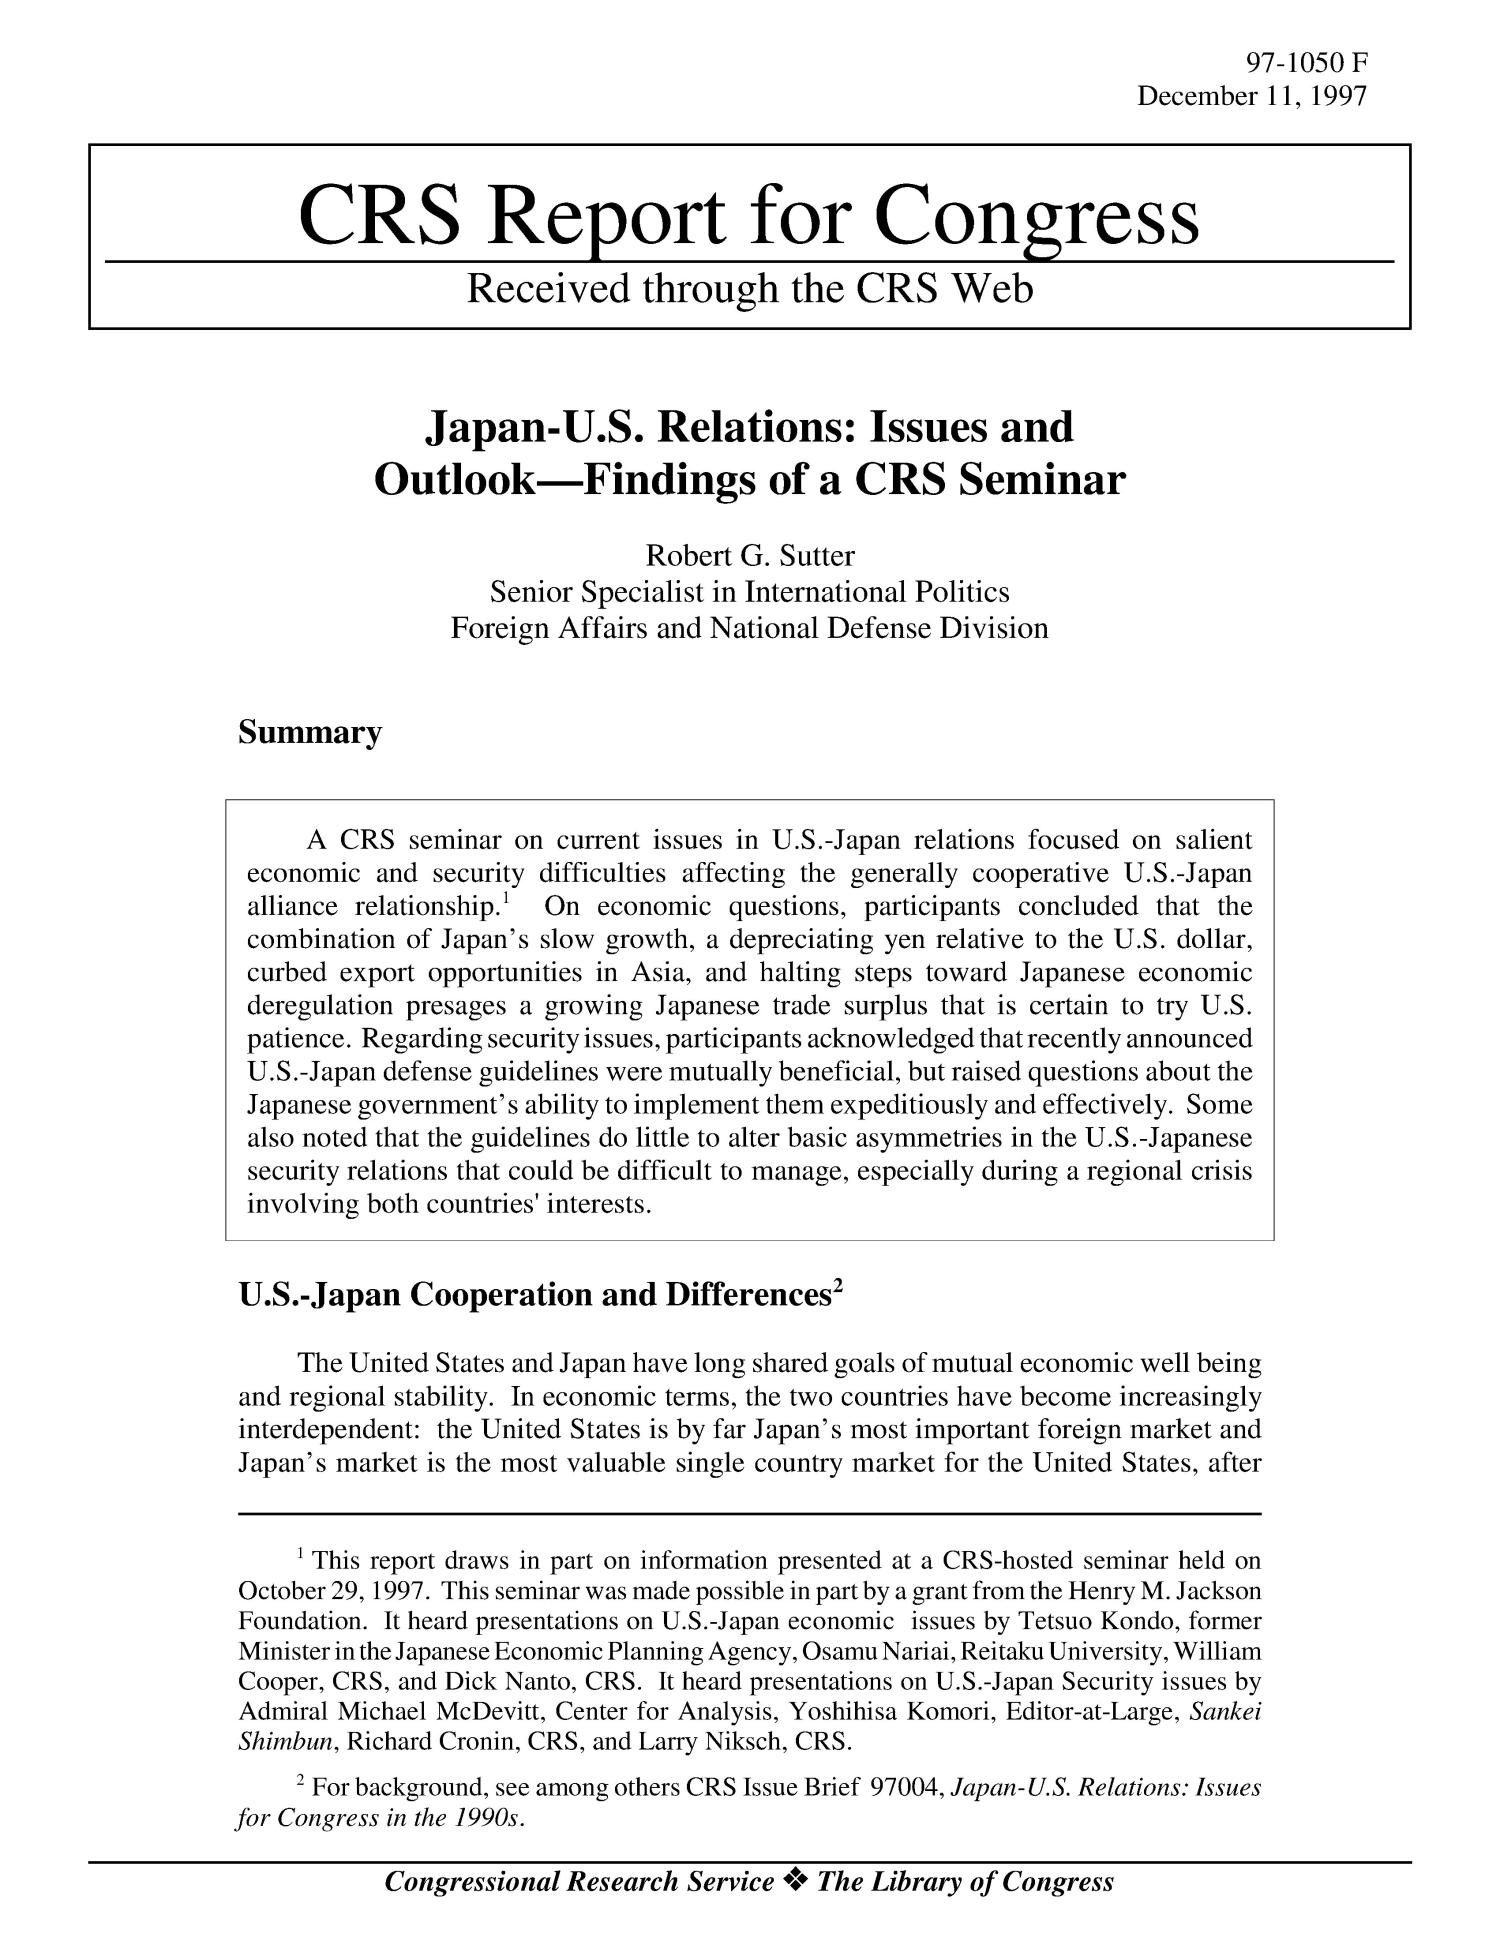 Japan-U.S. Relations: Issues and Outlook—Findings of a CRS Seminar
                                                
                                                    [Sequence #]: 1 of 5
                                                